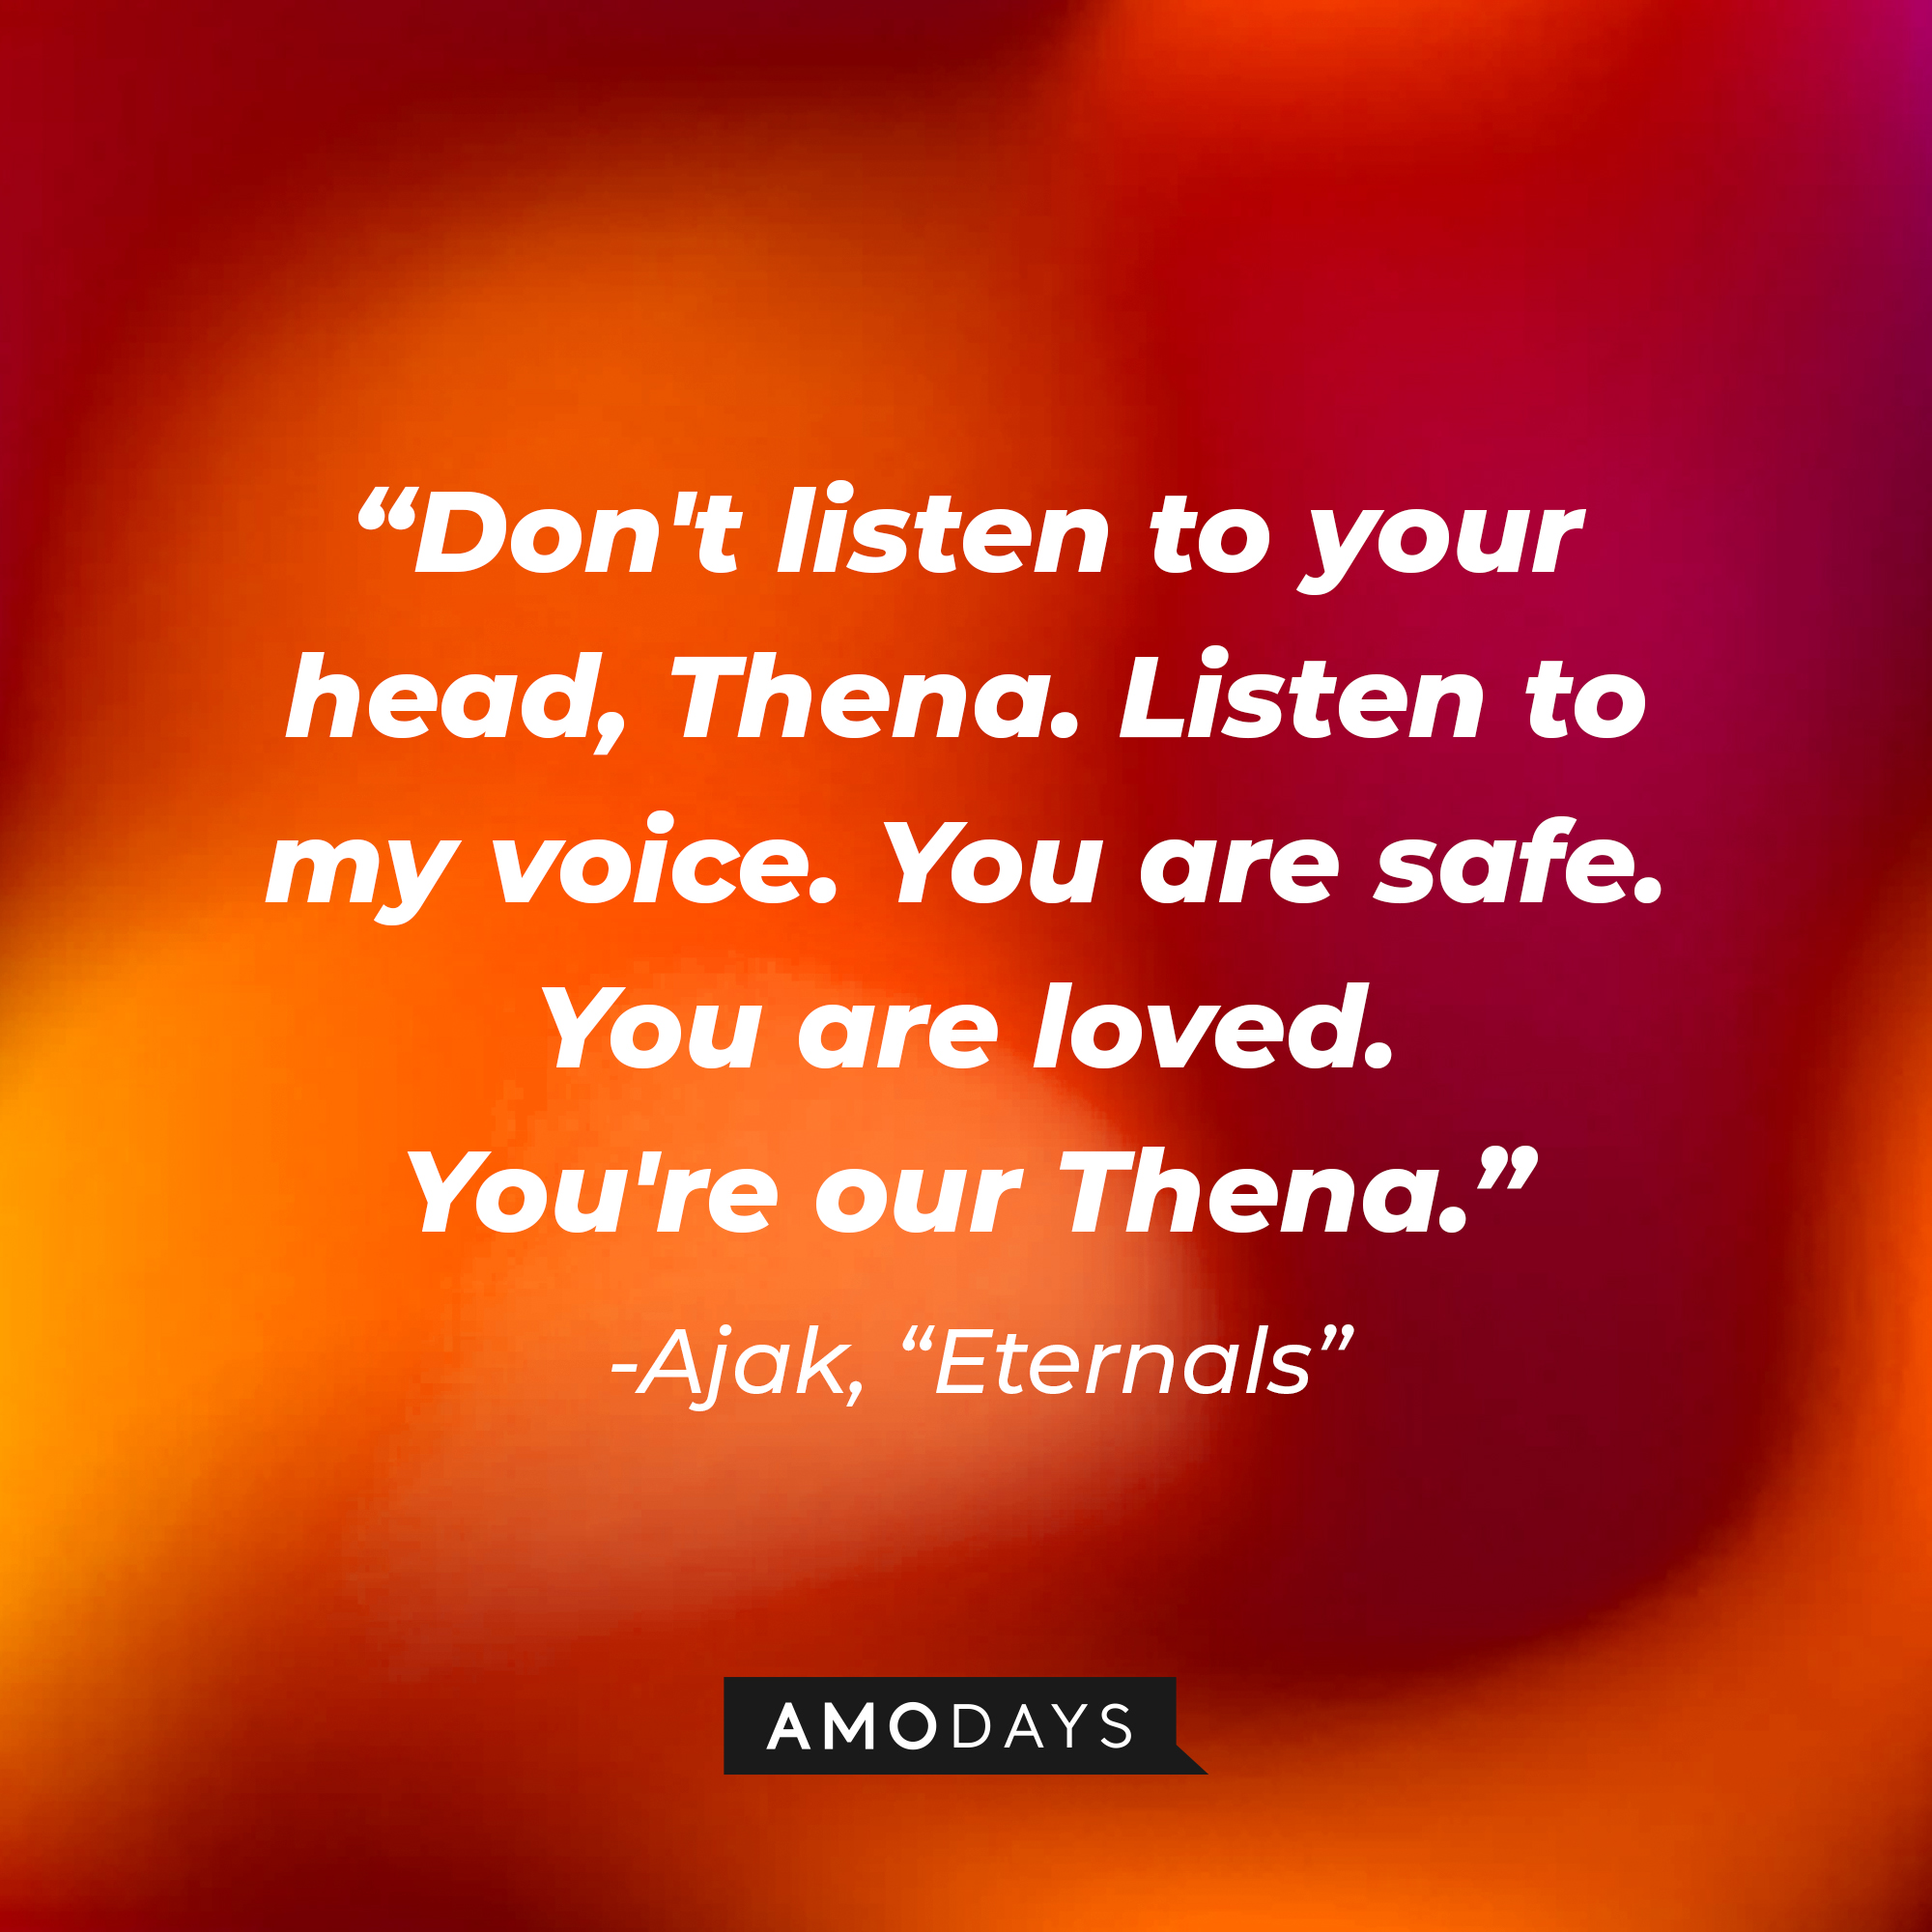 Ajak ‘s quote: "Don't listen to your head, Thena. Listen to my voice. You are safe. You are loved. You're our Thena." | Image: AmoDays